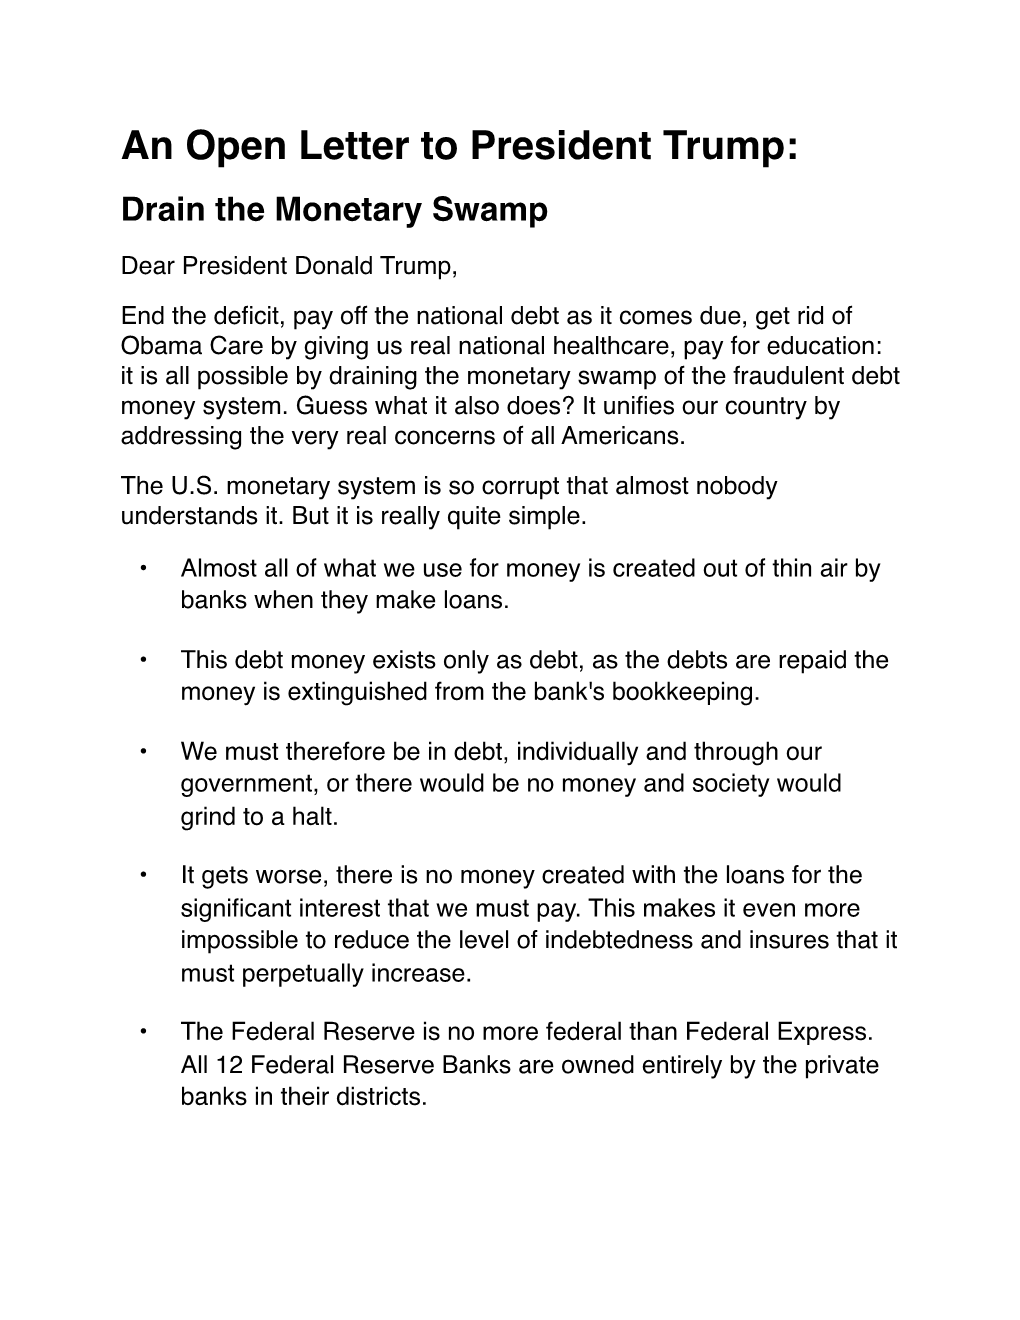 An Open Letter to President Trump: Drain the Monetary Swamp